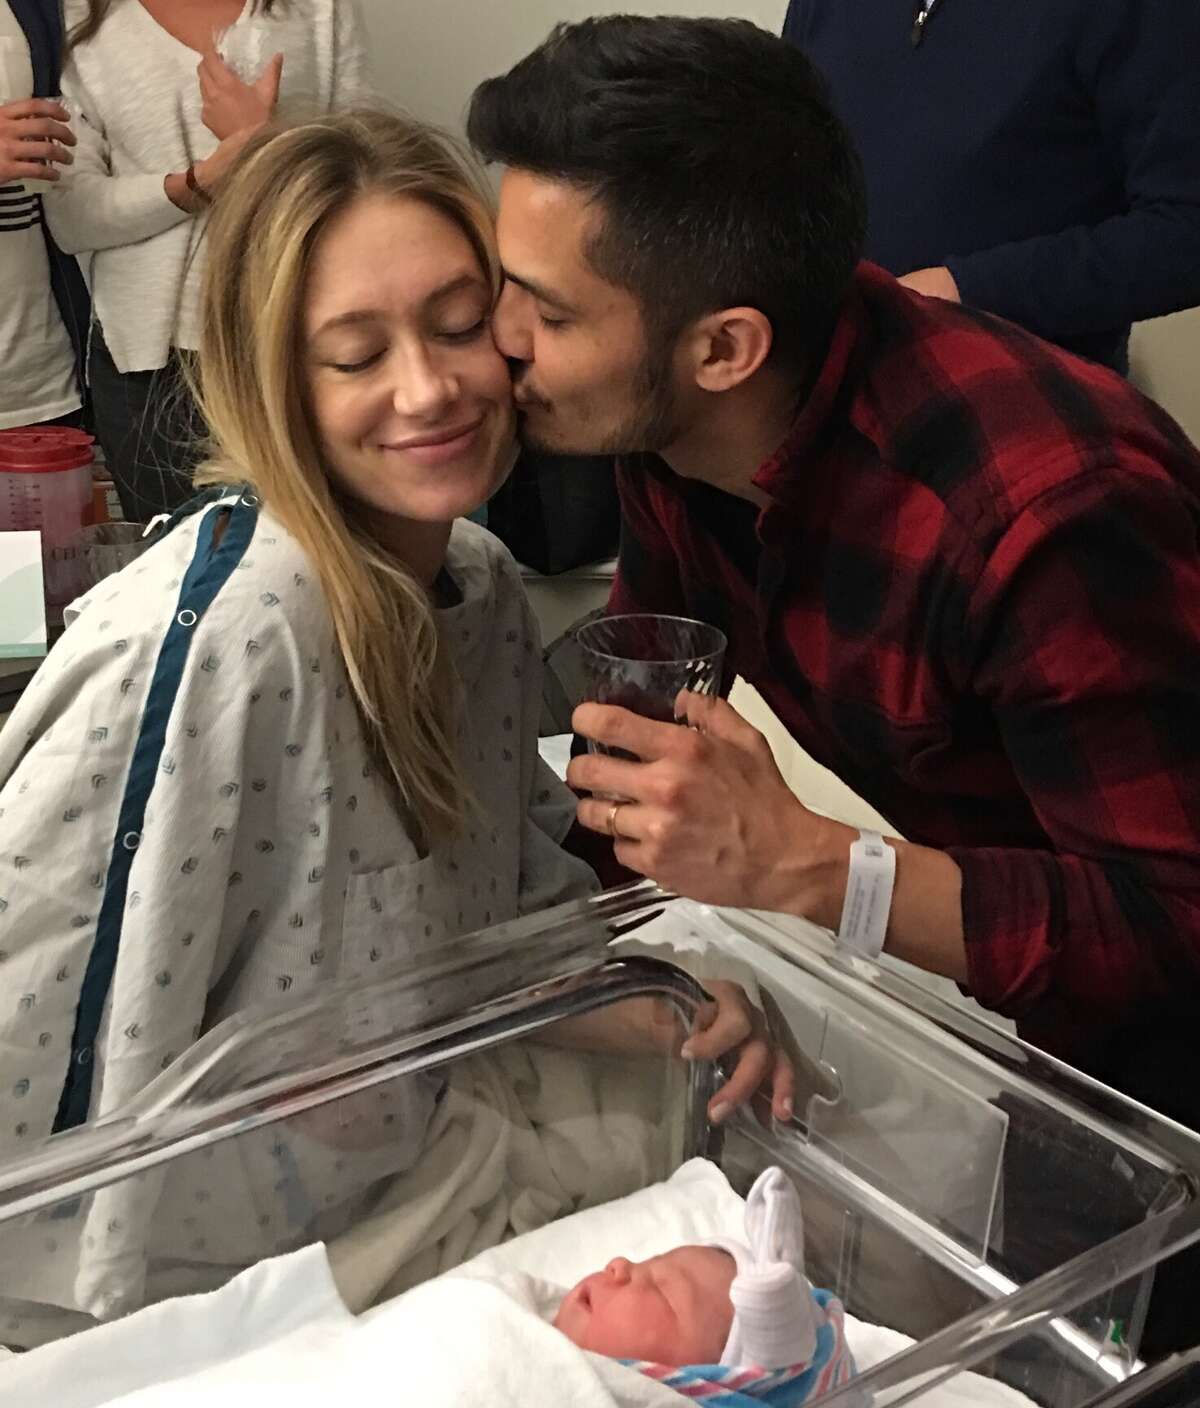 San Antonio-born TV star Nicholas Gonzalez kisses his beloved wife, Kelsey Crane, after the birth of their first child: a daughter named Ever Lee Wilde Gonzalez.